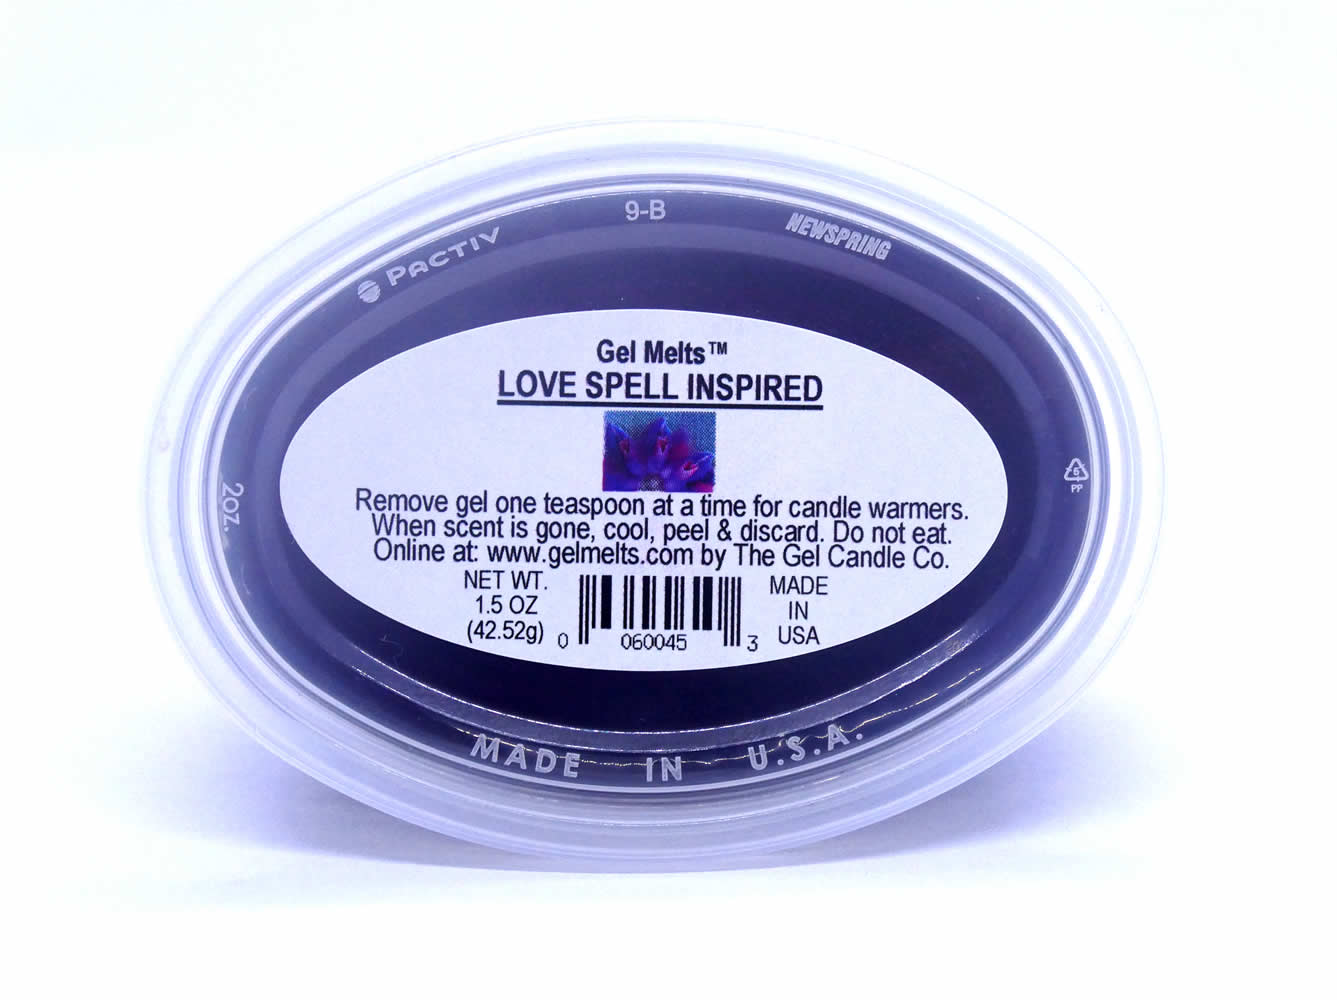 Love Spell Inspired scented Gel Melts™ for warmers - 3 pack - Click Image to Close